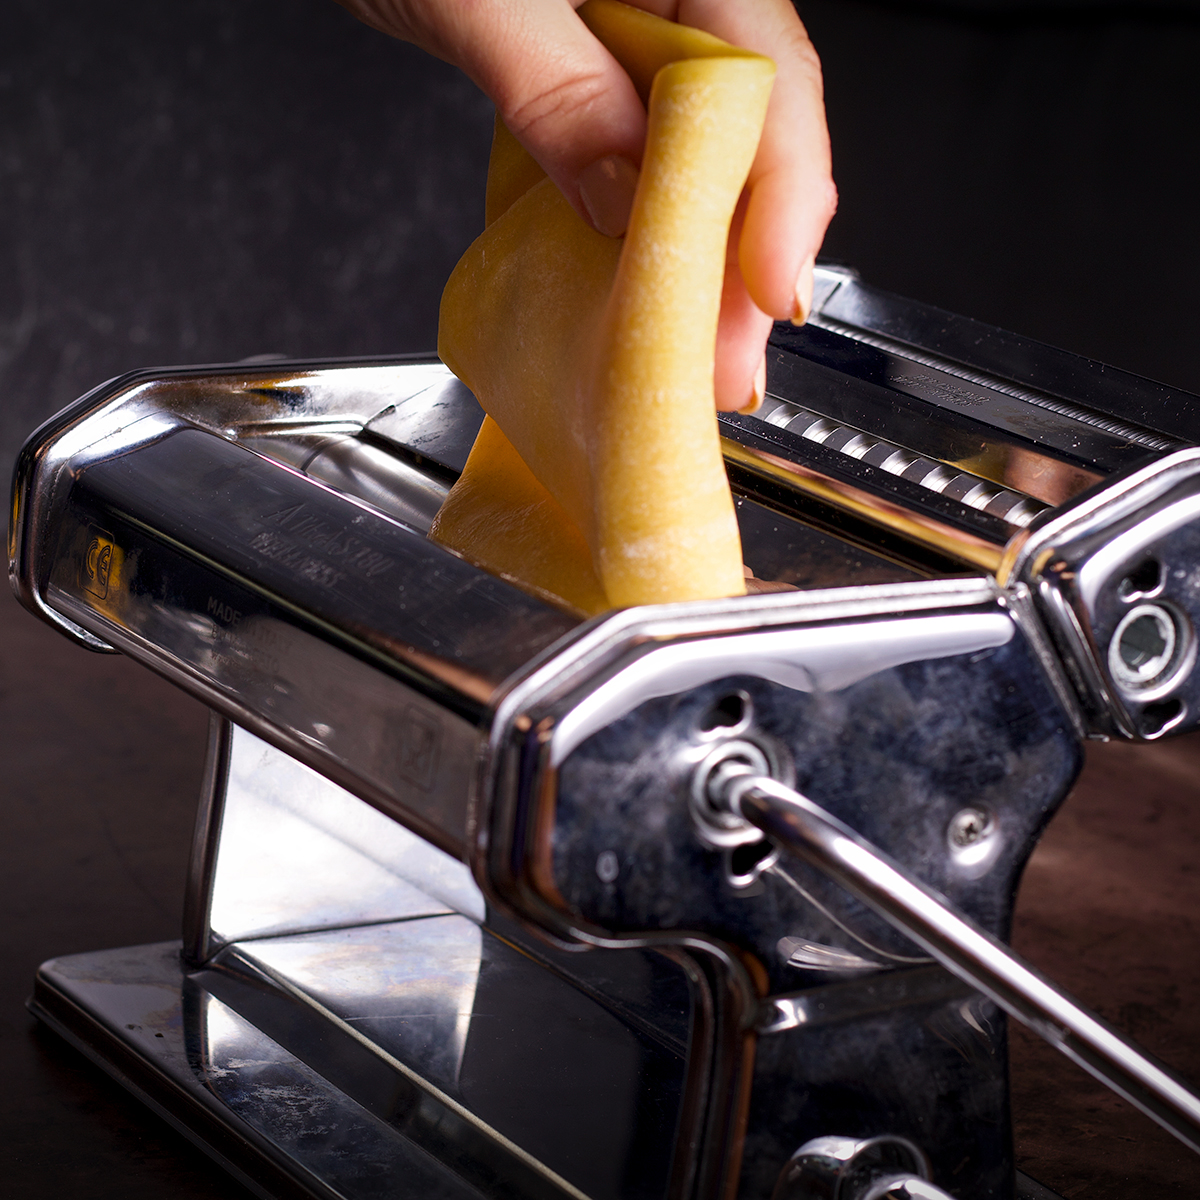 Rolling a piece of pasta dough through the rollers of a pasta maker.